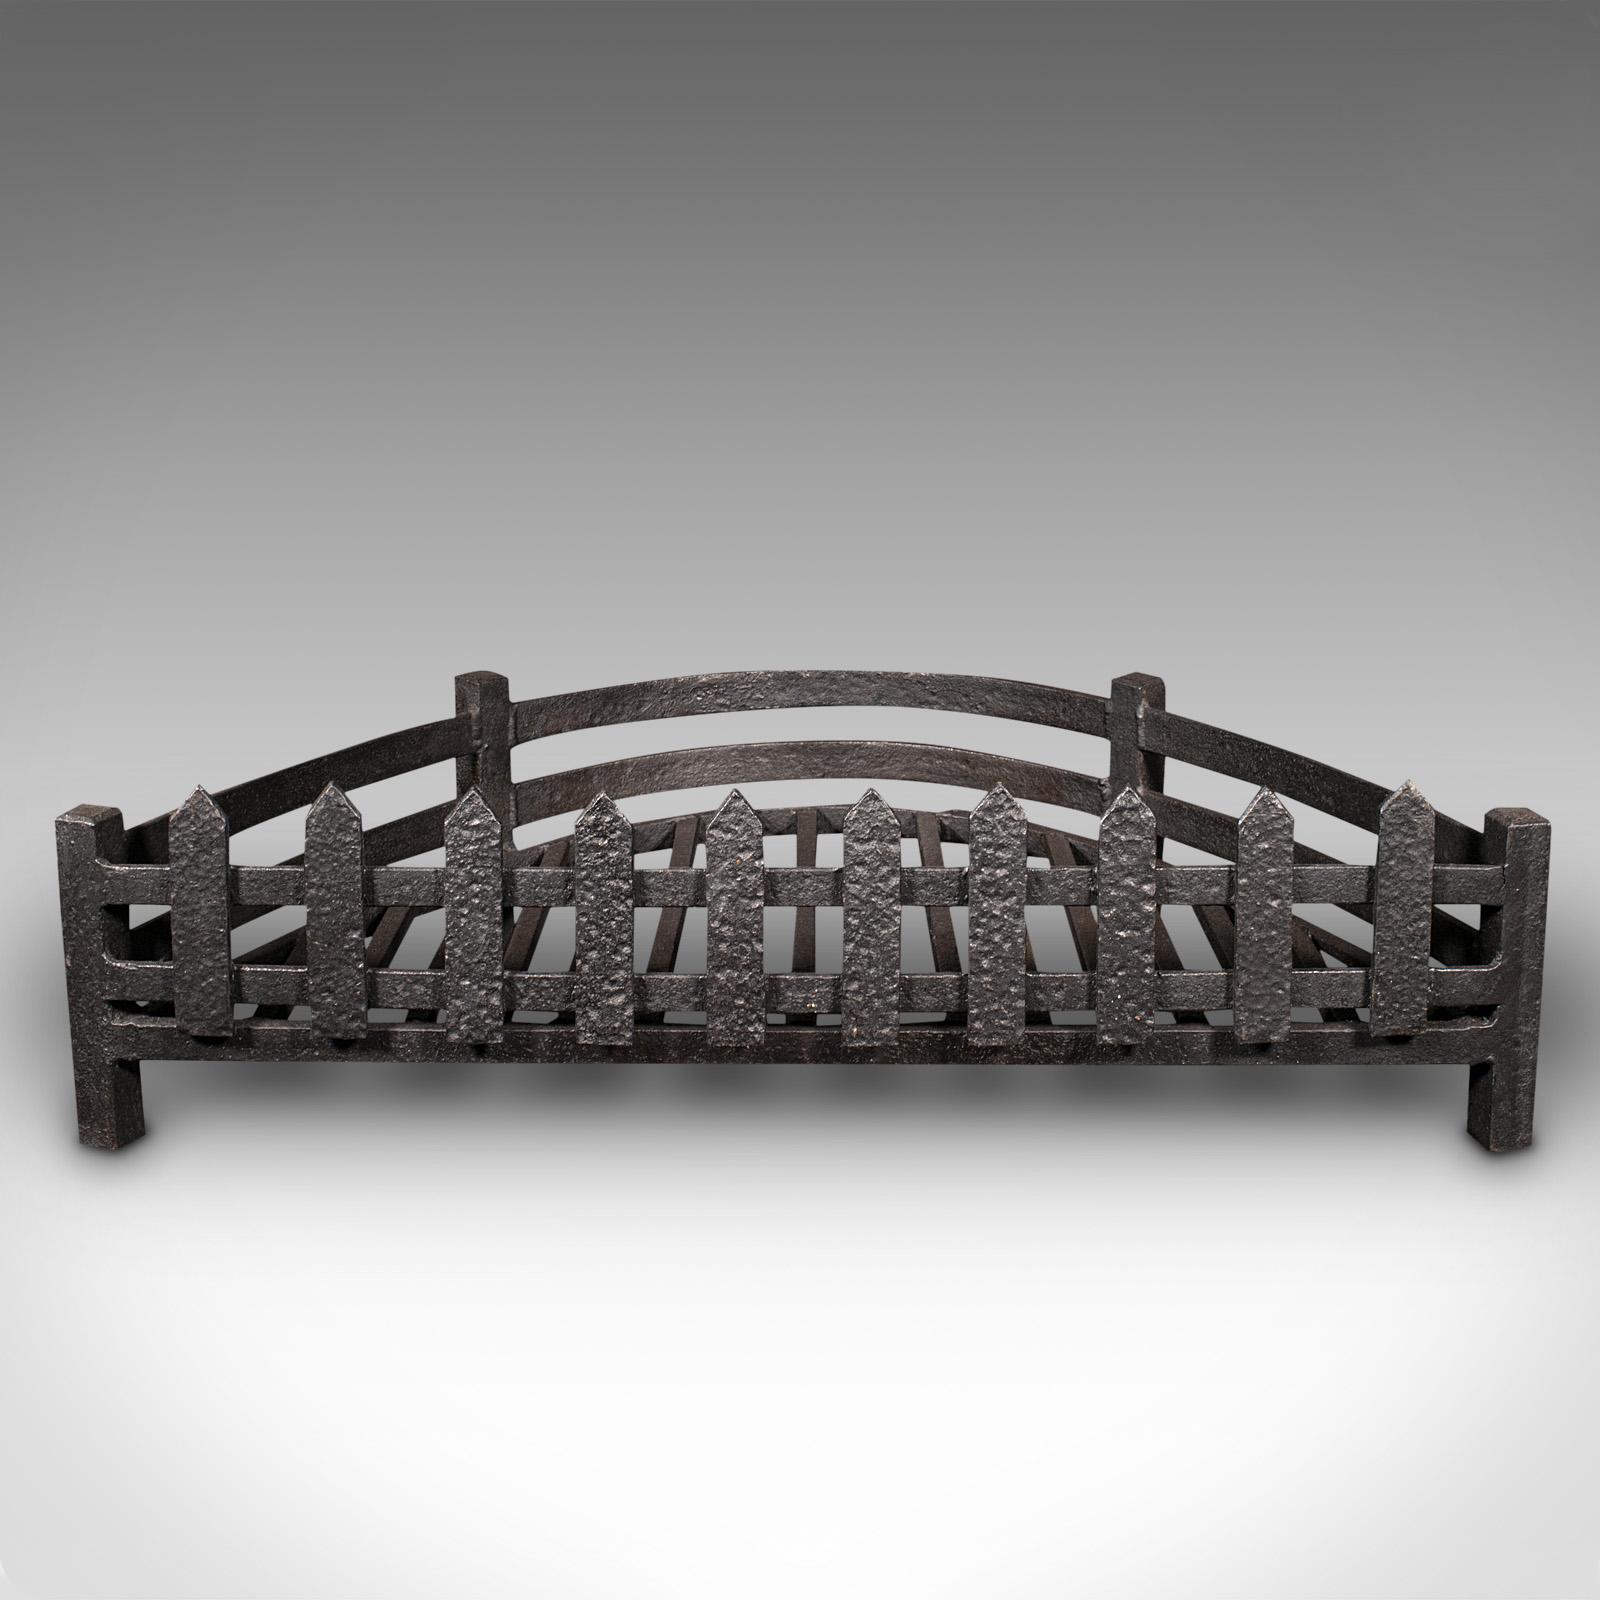 This is an antique demi-lune fire grate. An English, cast iron fireplace basket, dating to the late Victorian period, circa 1900.

Delightfully unusual shape, with appealing weathered finish
Displays a desirable aged patina throughout
Patinated